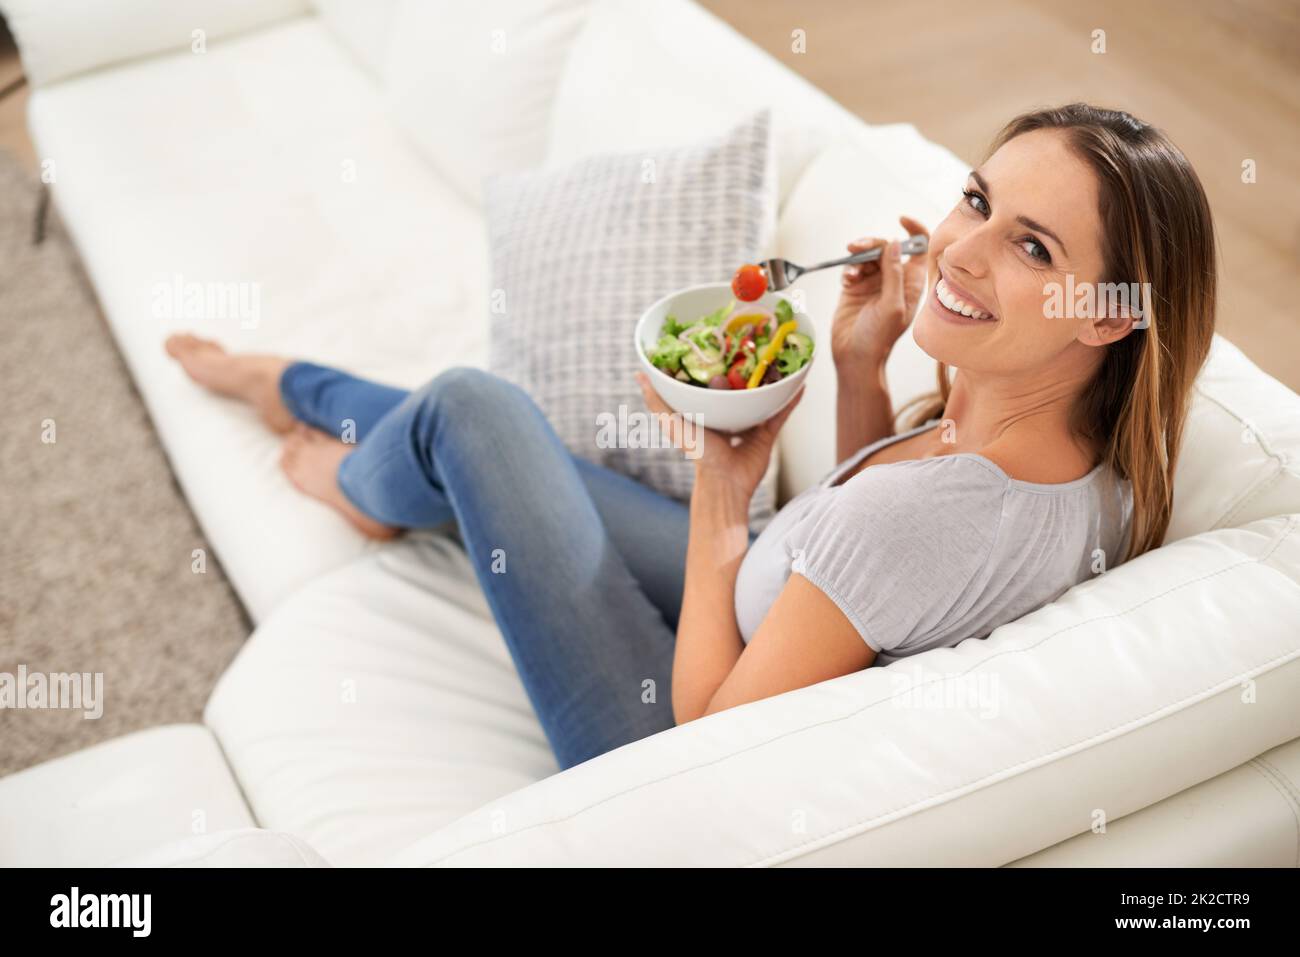 Its not a diet its called healthy eating. A young woman enjoying her salad with a smile. Stock Photo